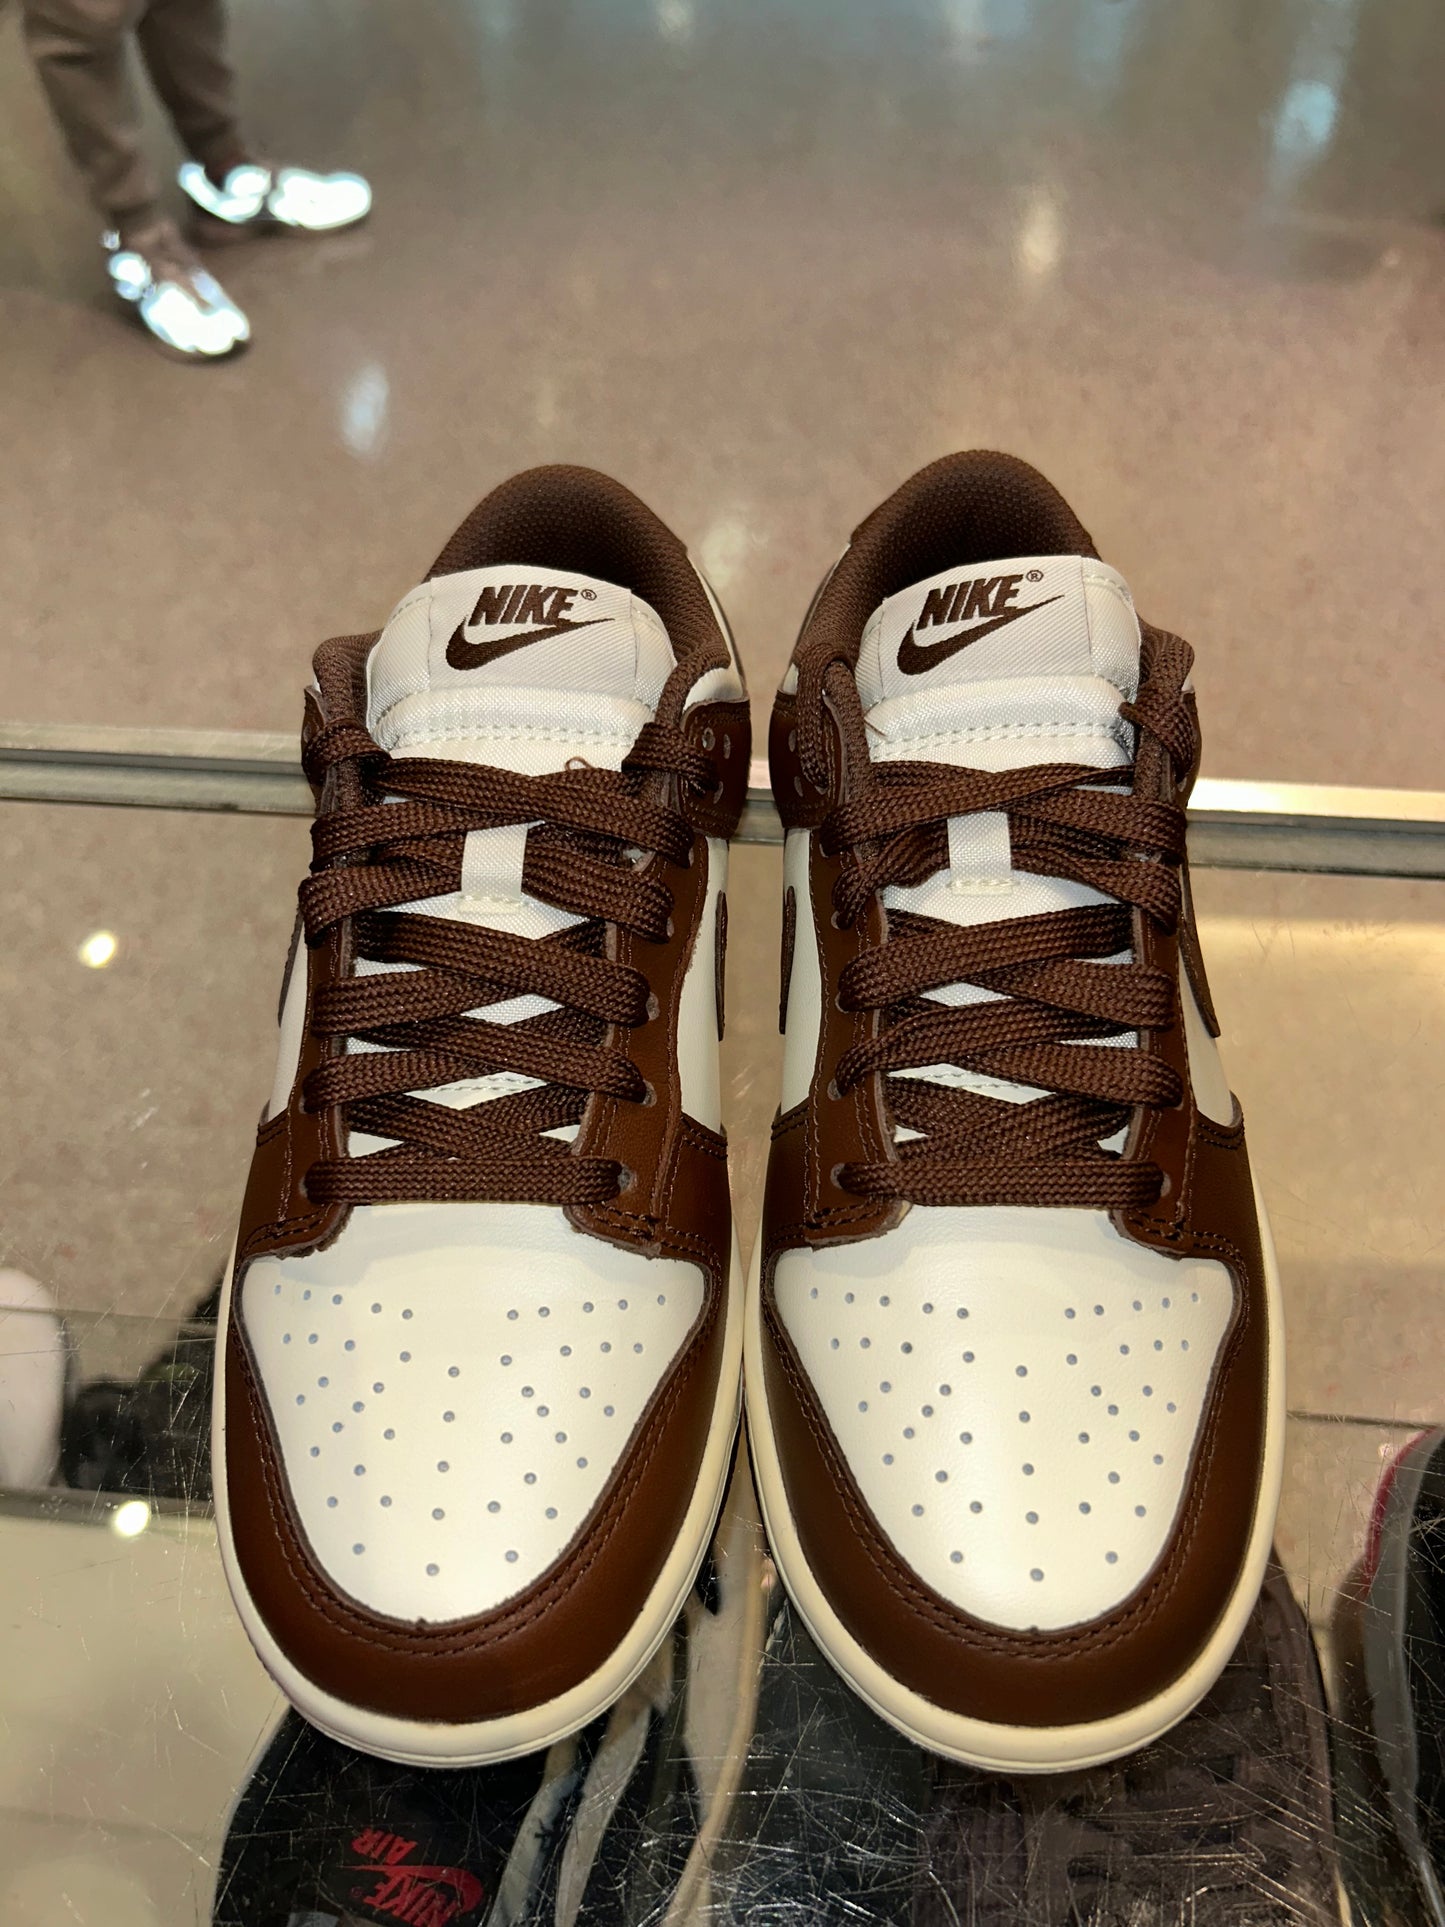 Size 3.5 (5W) Dunk Low “Cacao Wow” Brand New (Mall)